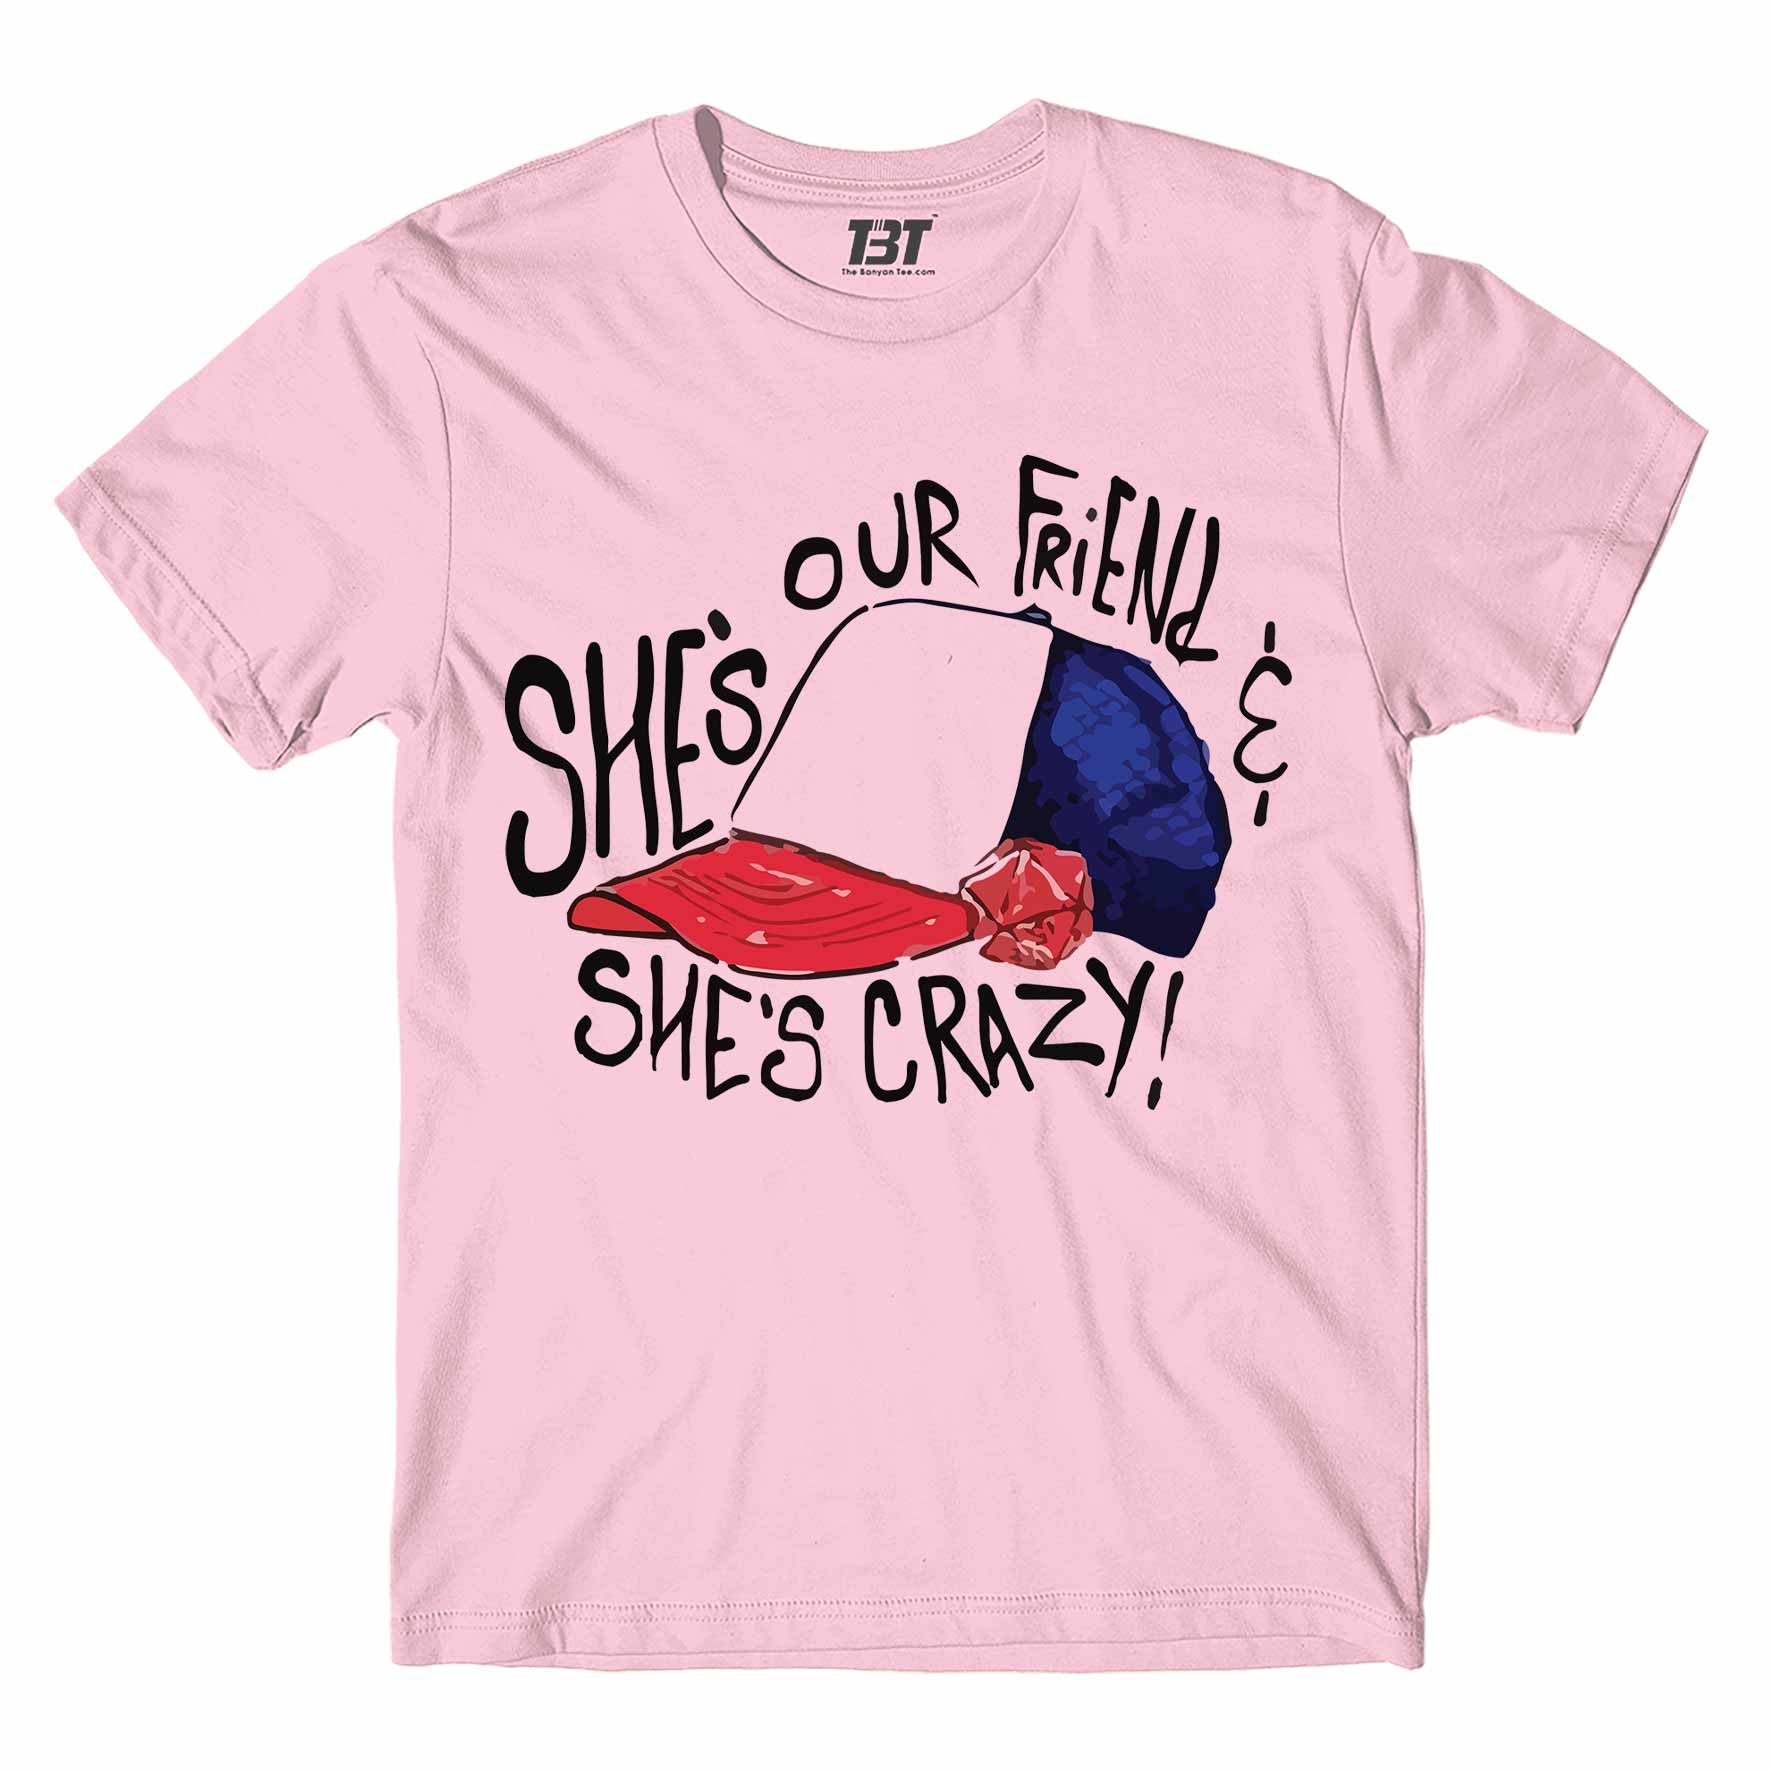 stranger things she's crazy t-shirt tv & movies buy online united states of america usa the banyan tee tbt men women girls boys unisex baby pink